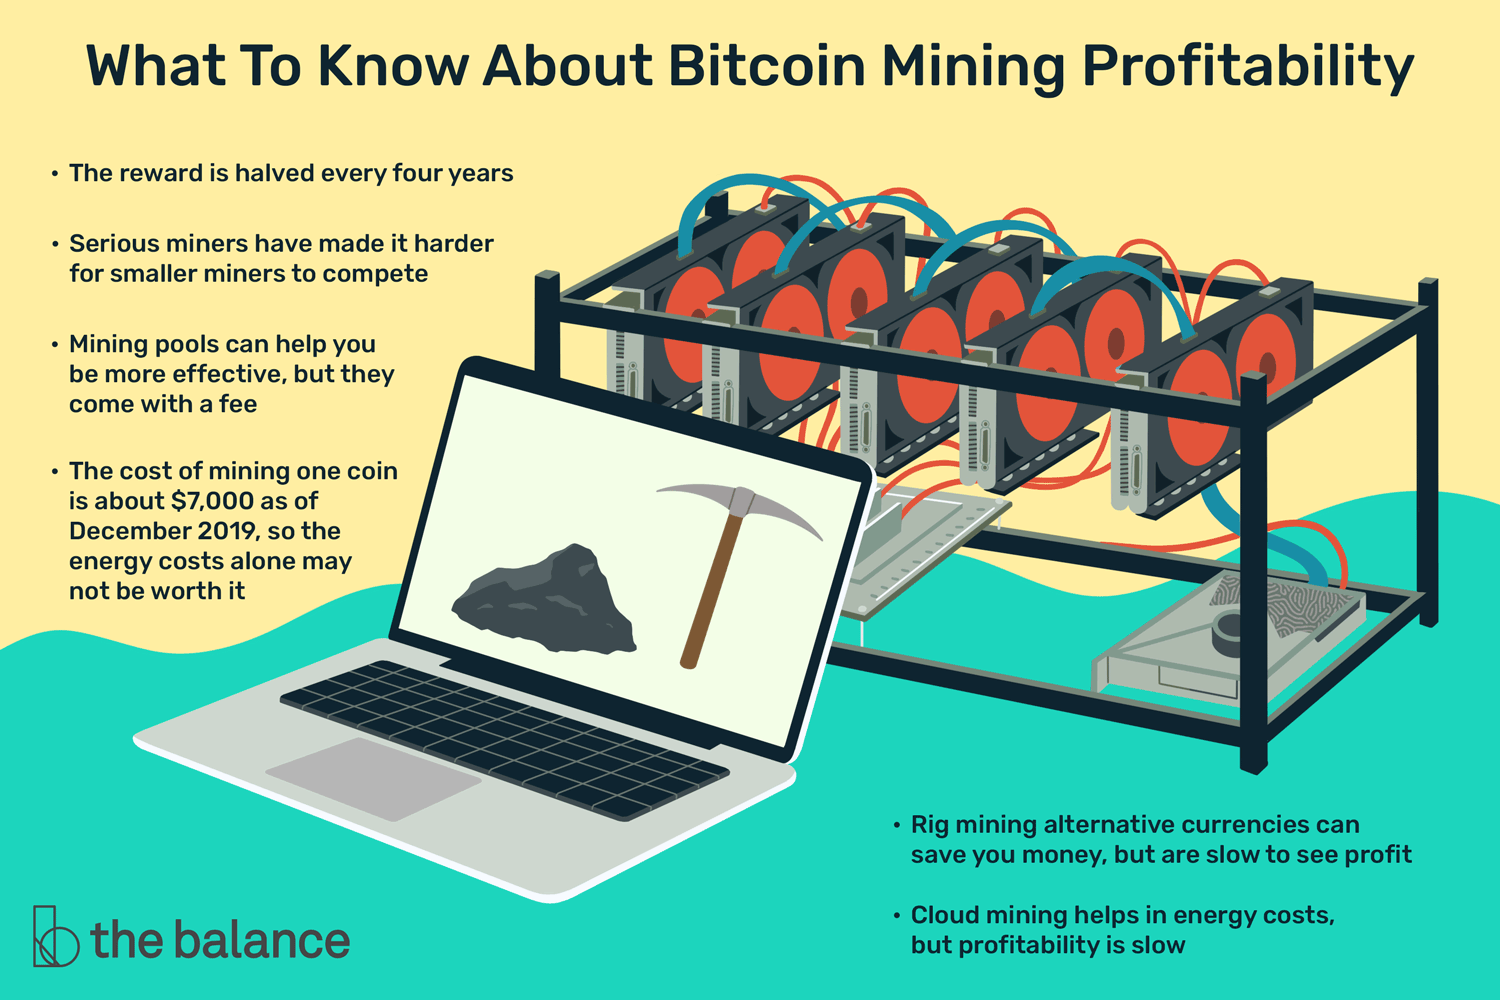 Are bitcoin miners profitable? - asic miner for sale - Quora